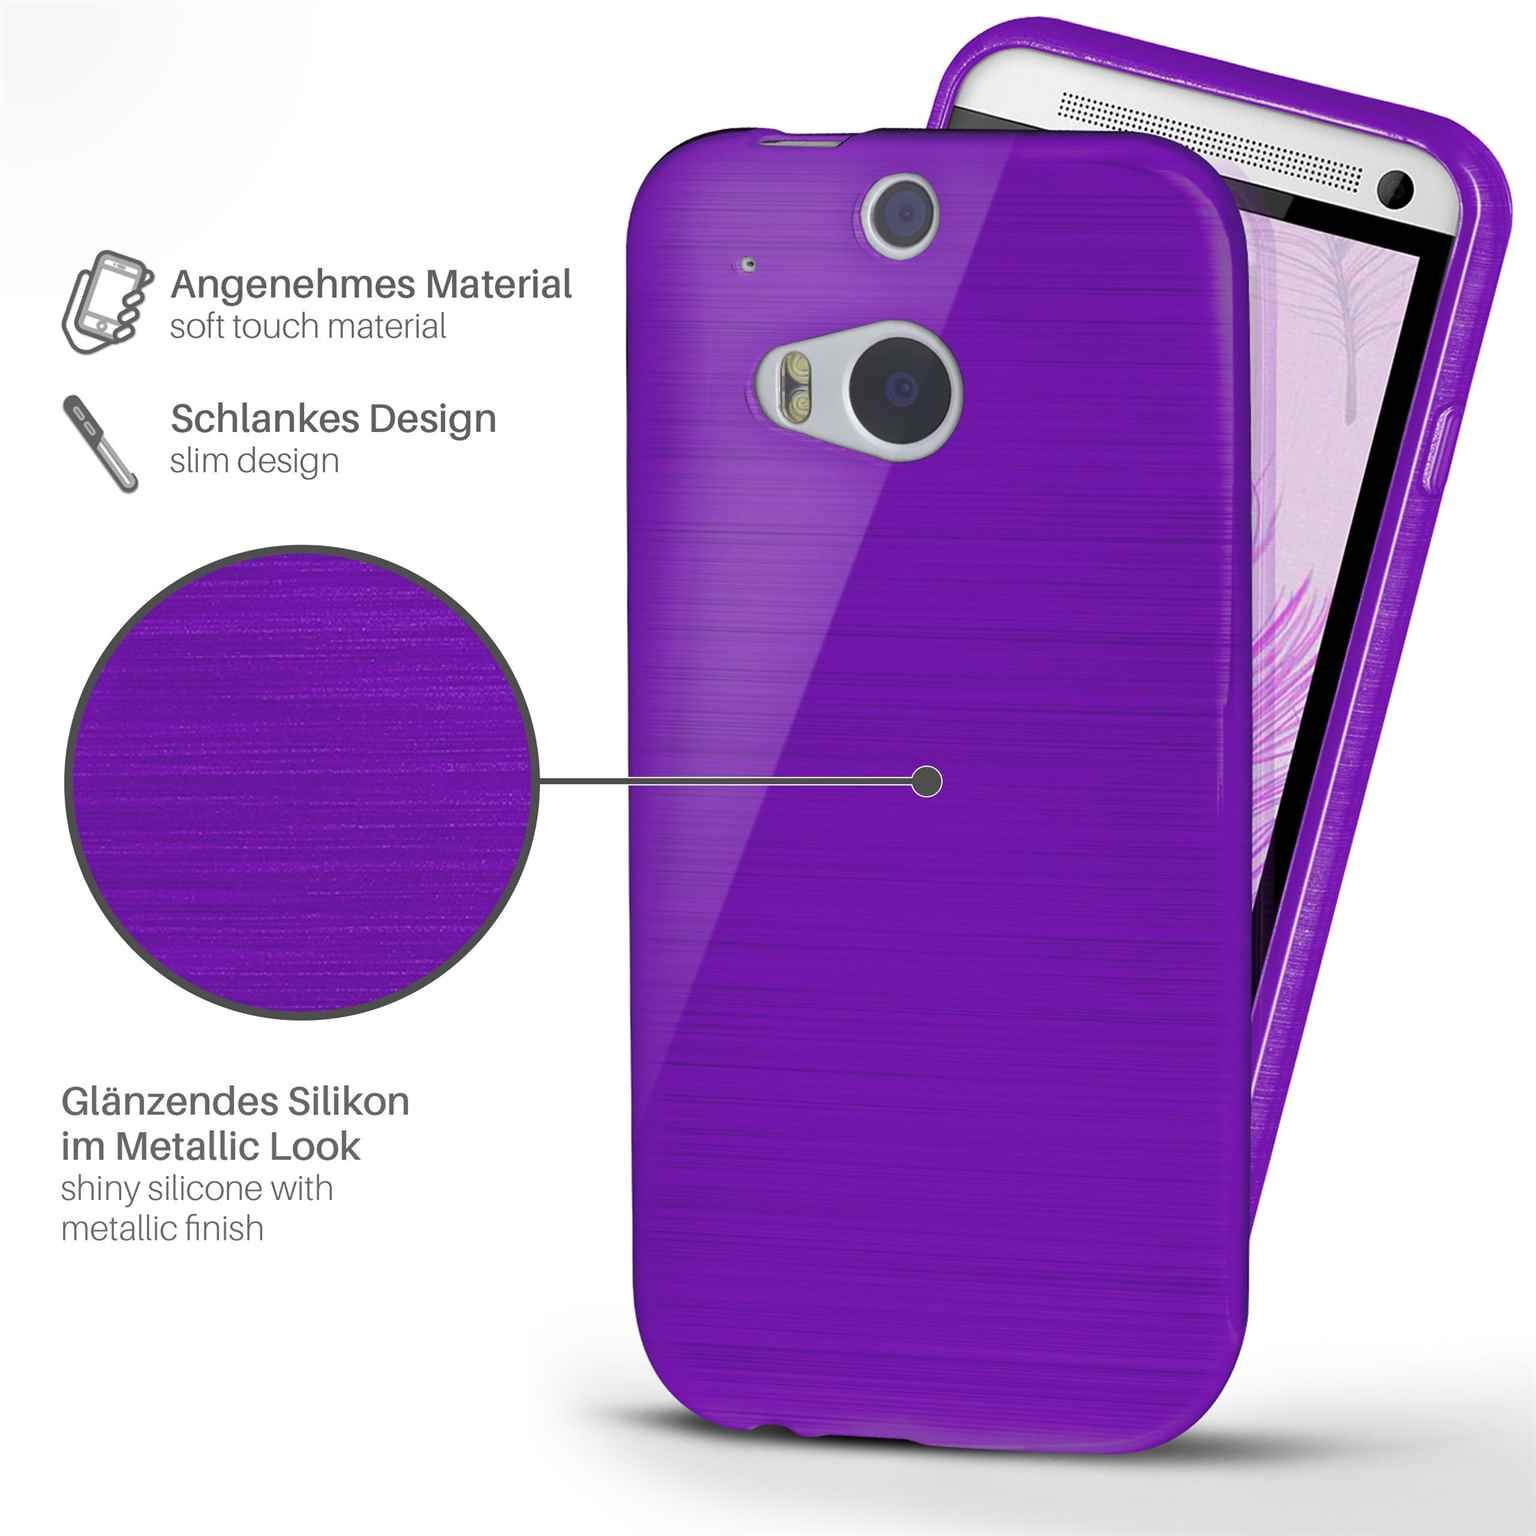 MOEX Brushed HTC, Backcover, One M8, Purpure-Purple Case